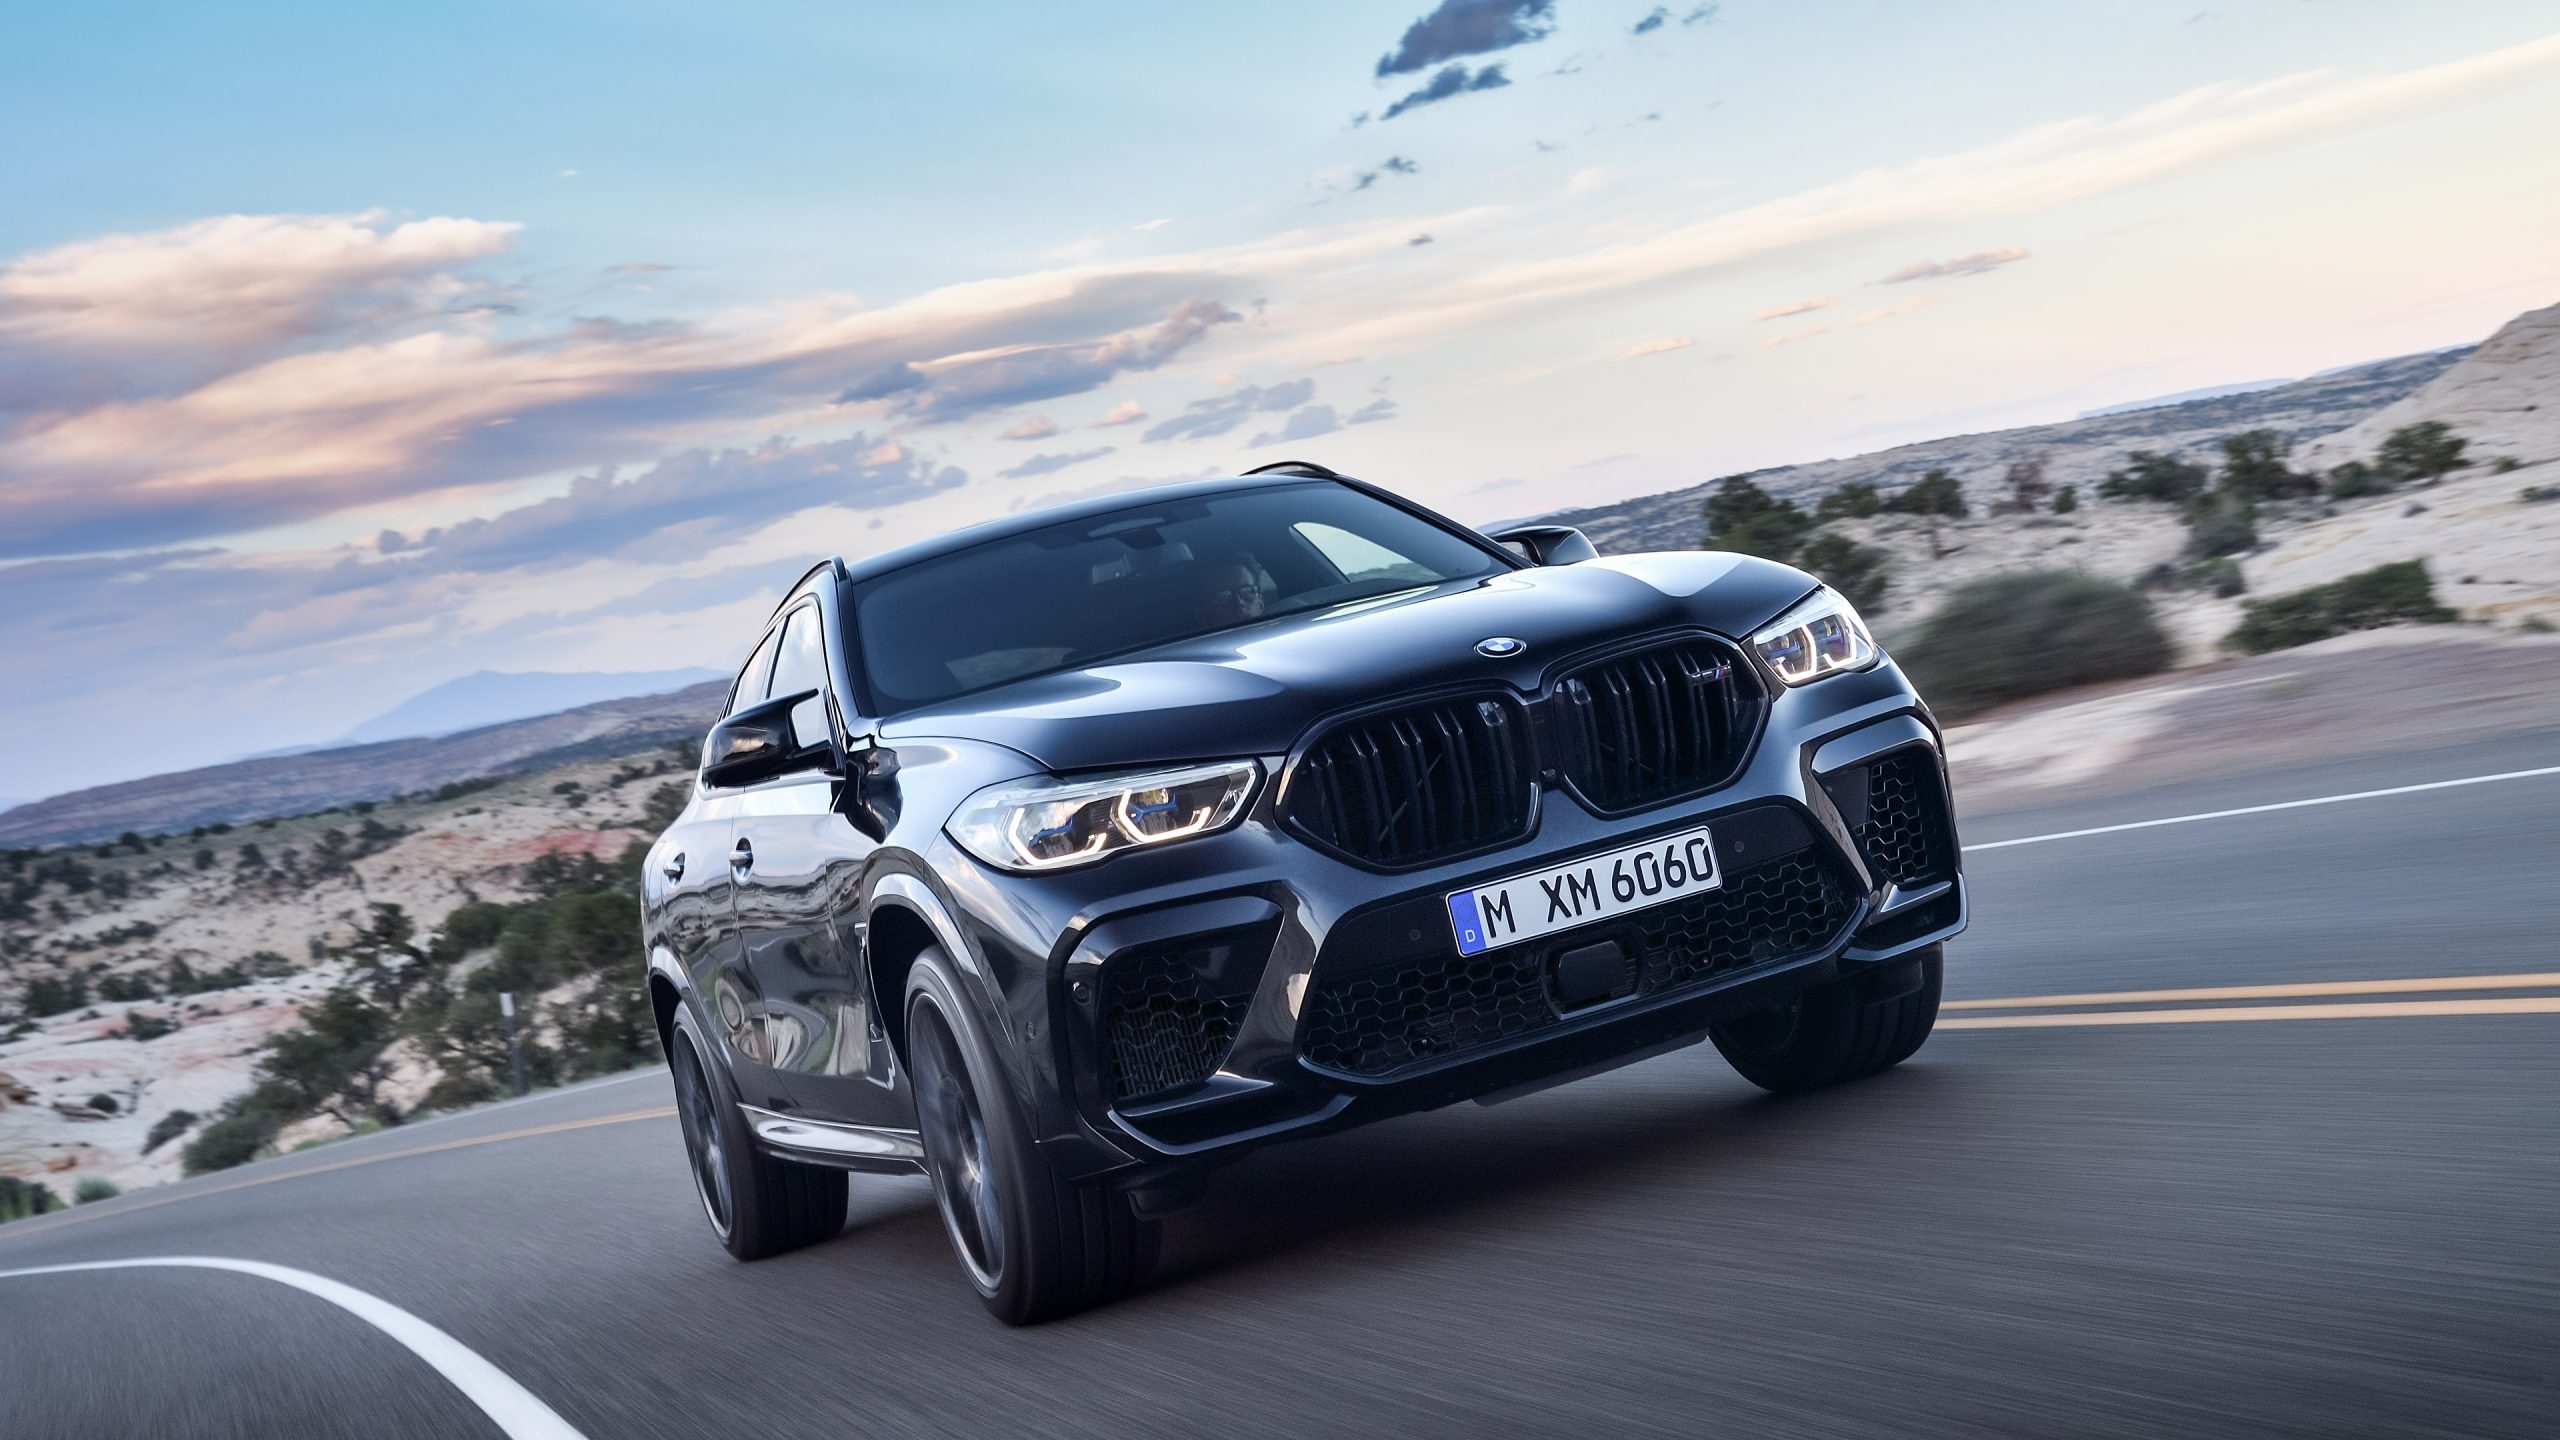 BMW X6, Competition model, Unmatched power, 2020 edition, 2560x1440 HD Desktop